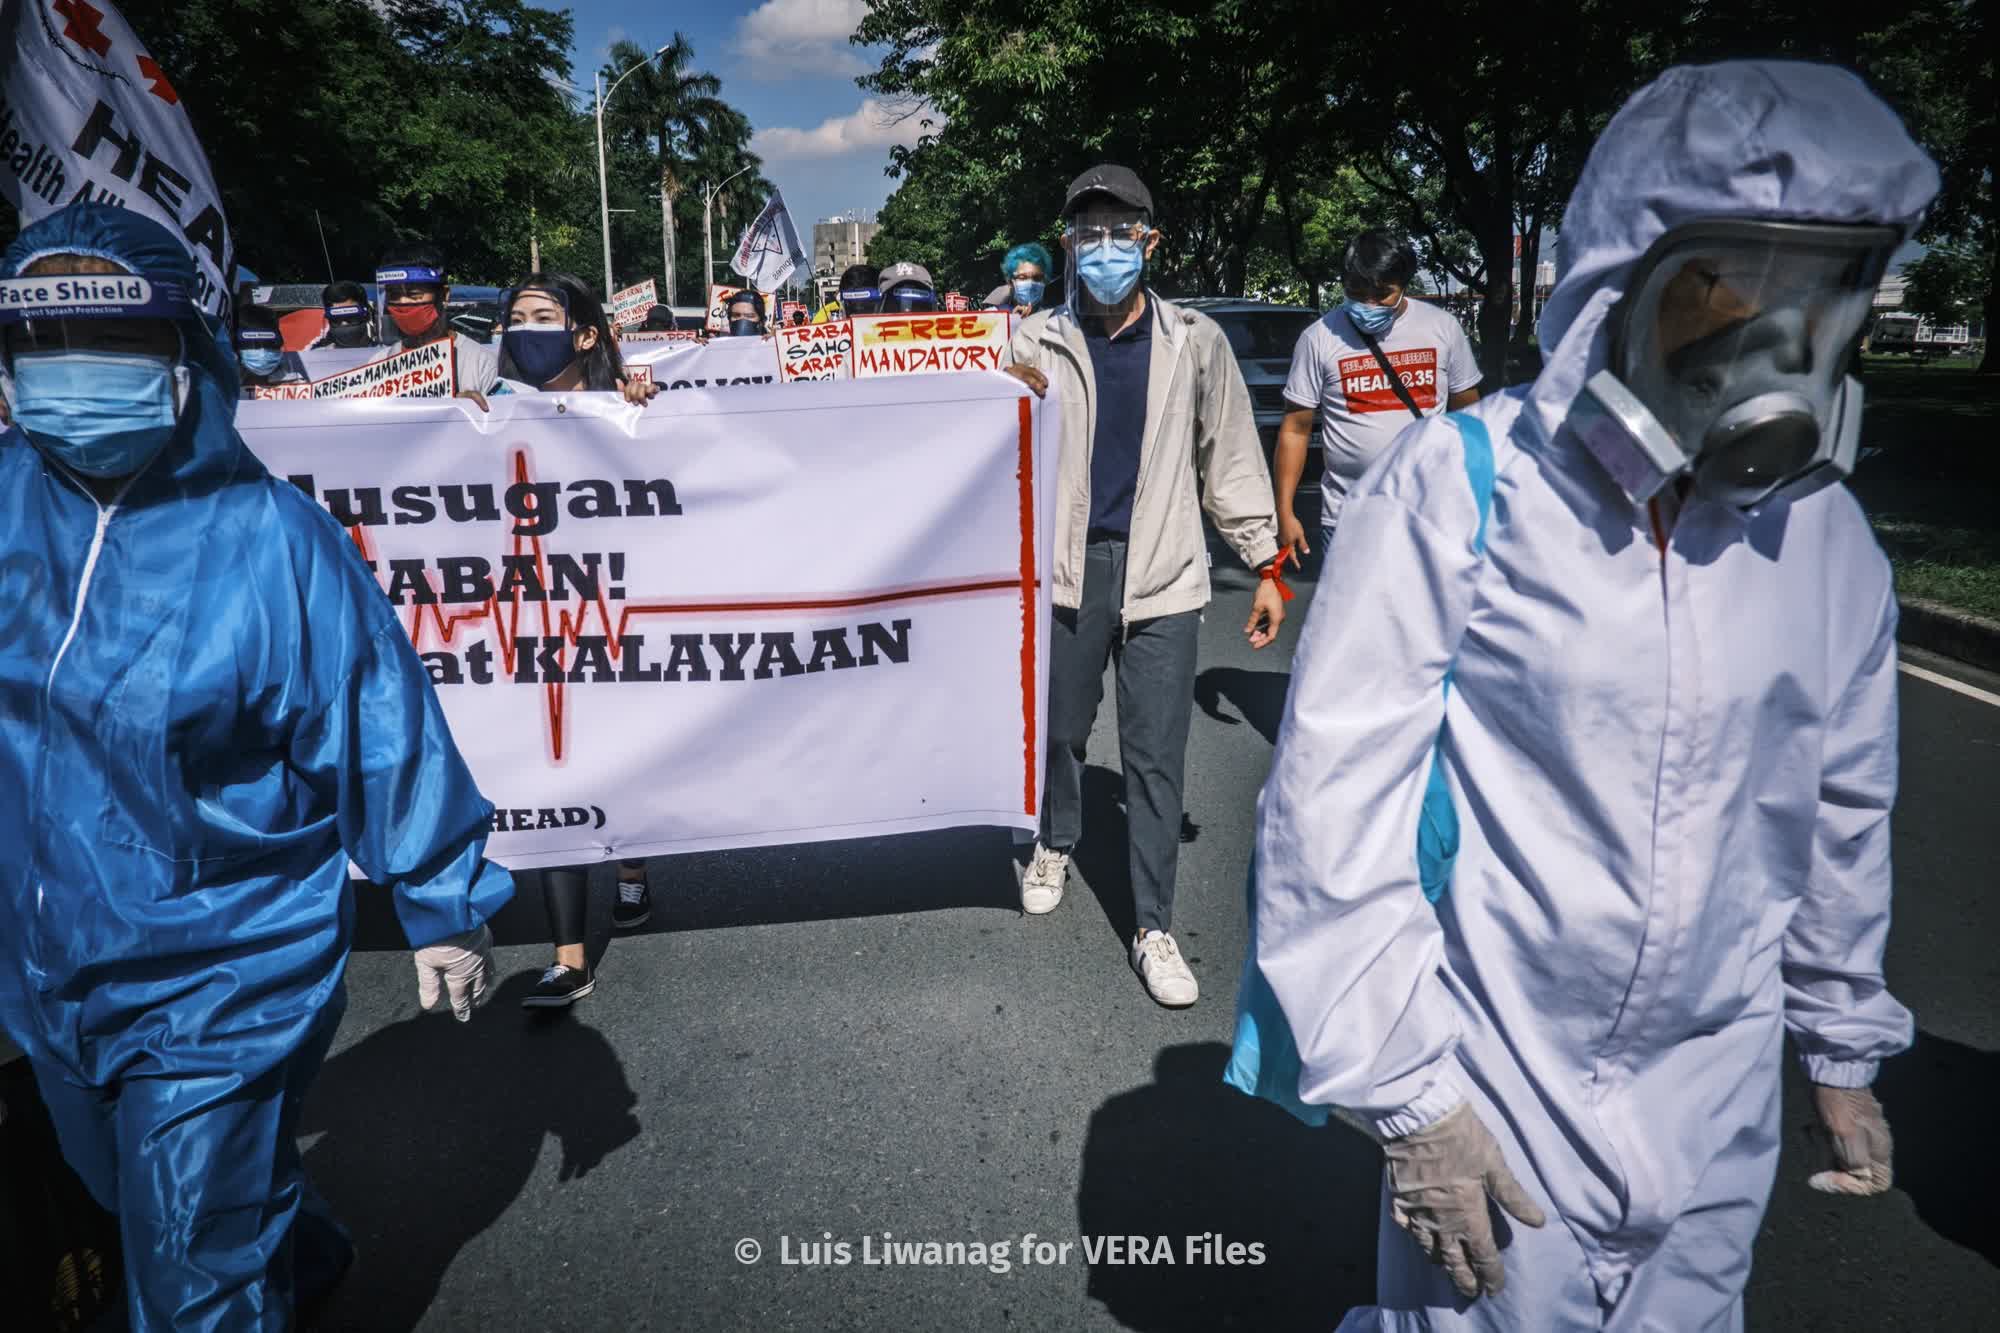 Despite ban, voices of dissent ring loud and clear SONA 2020 21/19  Photos by Luis Liwanag